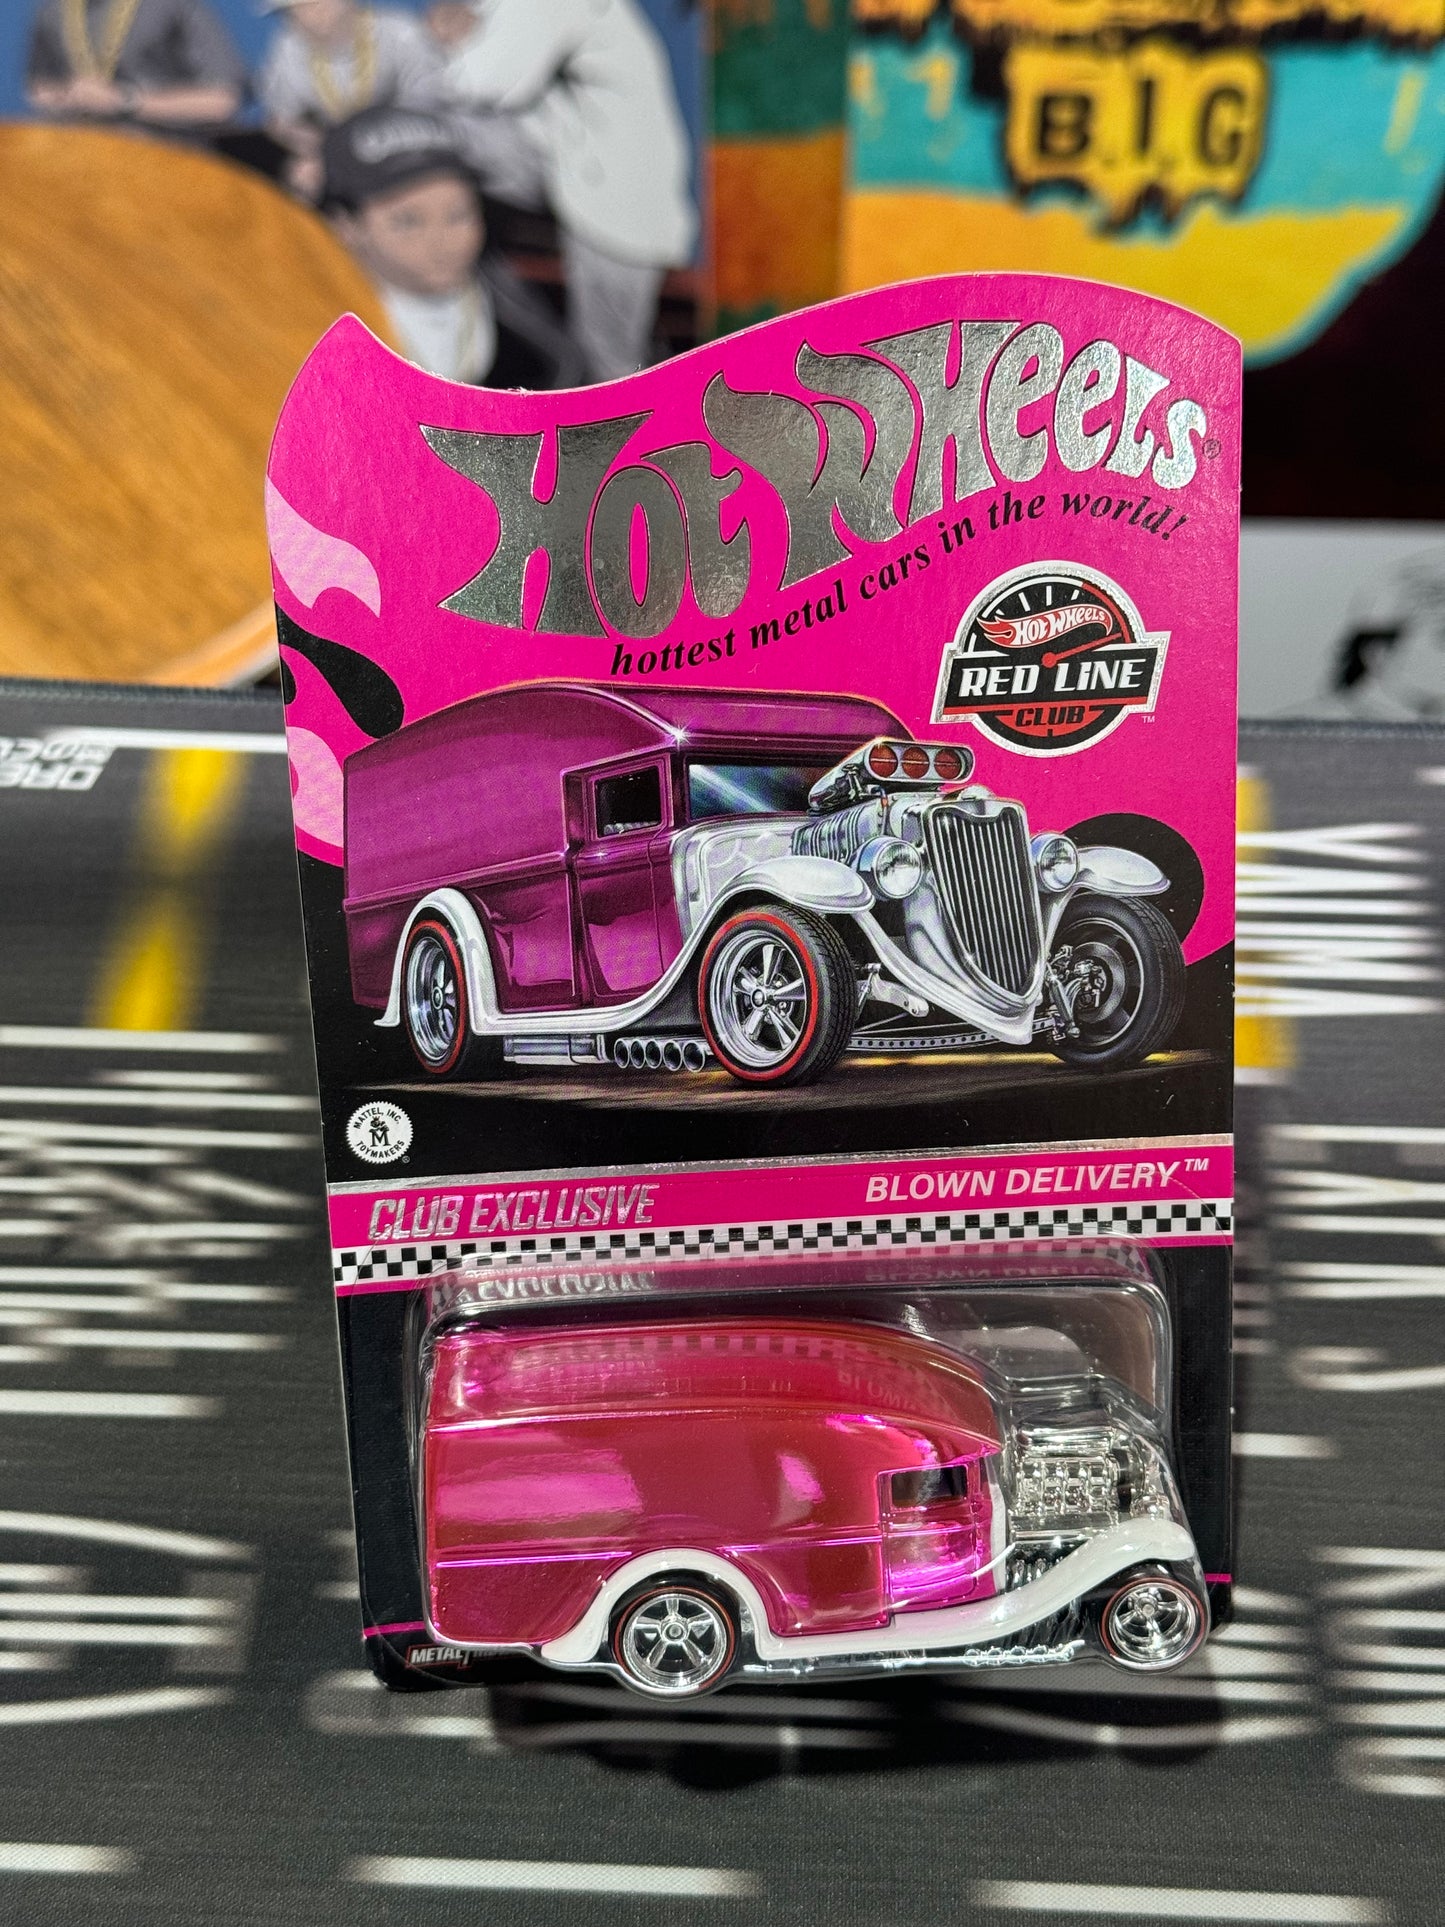 Hot Wheels Club Exclusive Blown Delivery